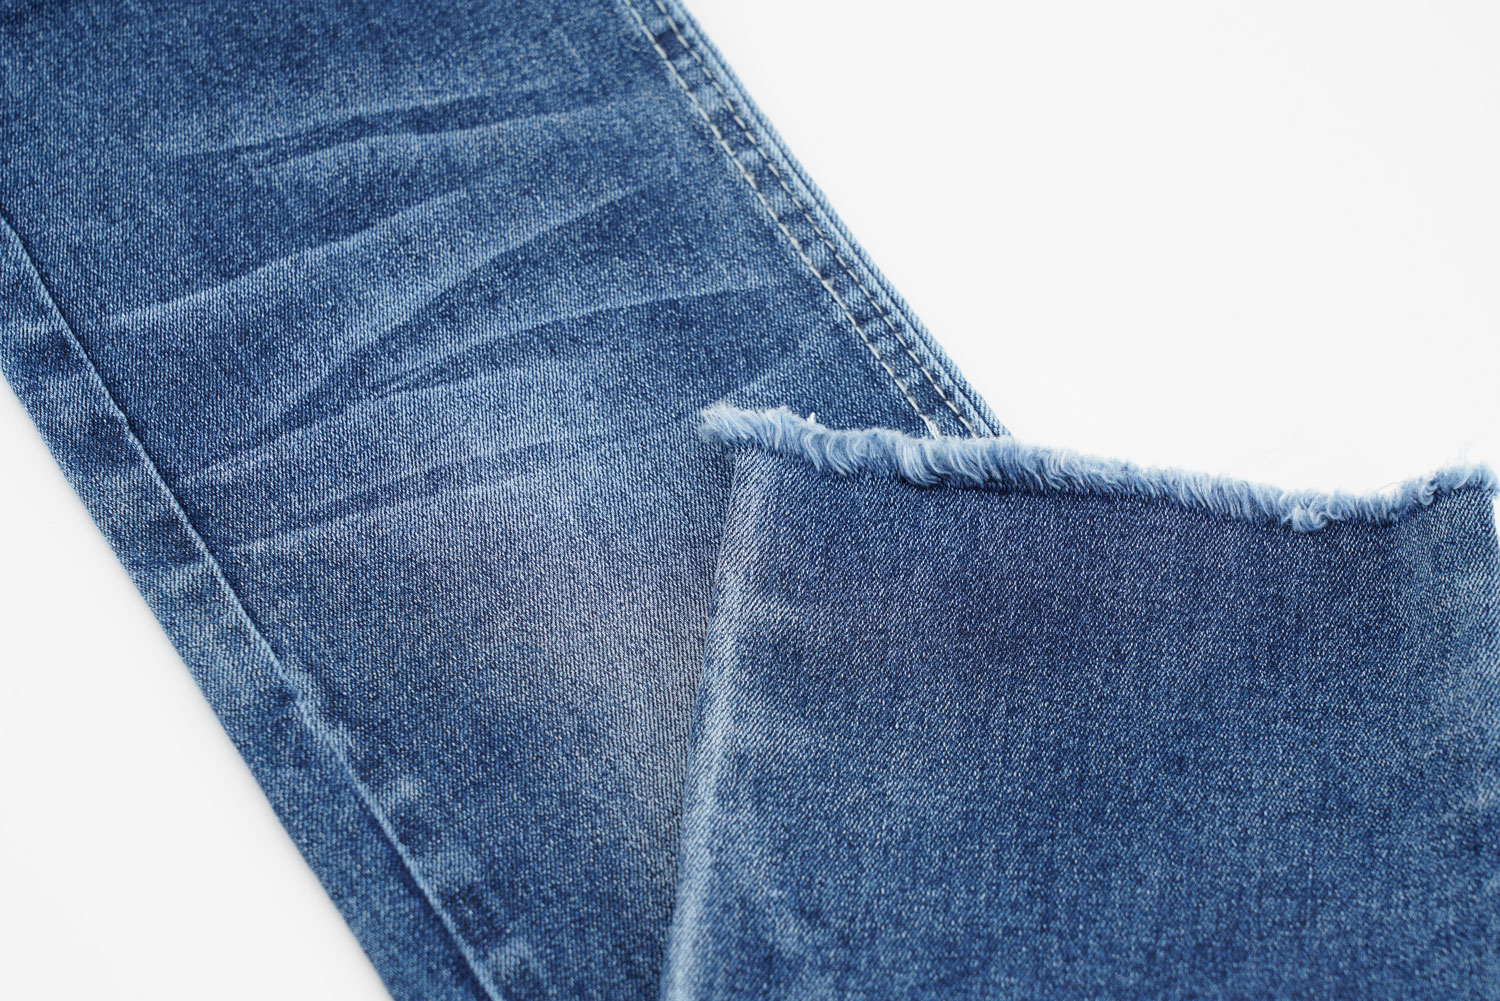 Why You Should Have a Stretch Denim Material? 2